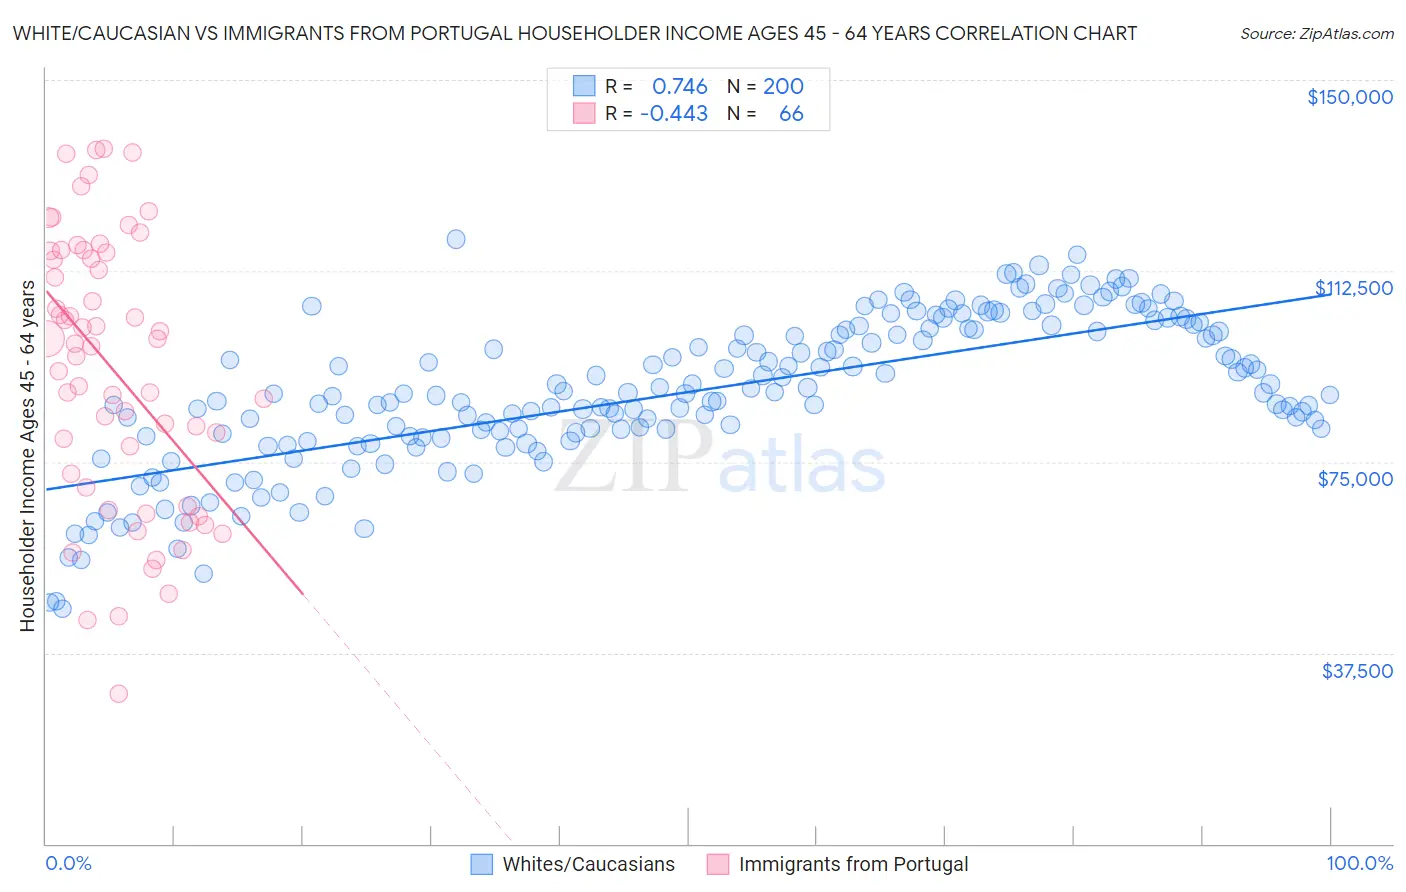 White/Caucasian vs Immigrants from Portugal Householder Income Ages 45 - 64 years